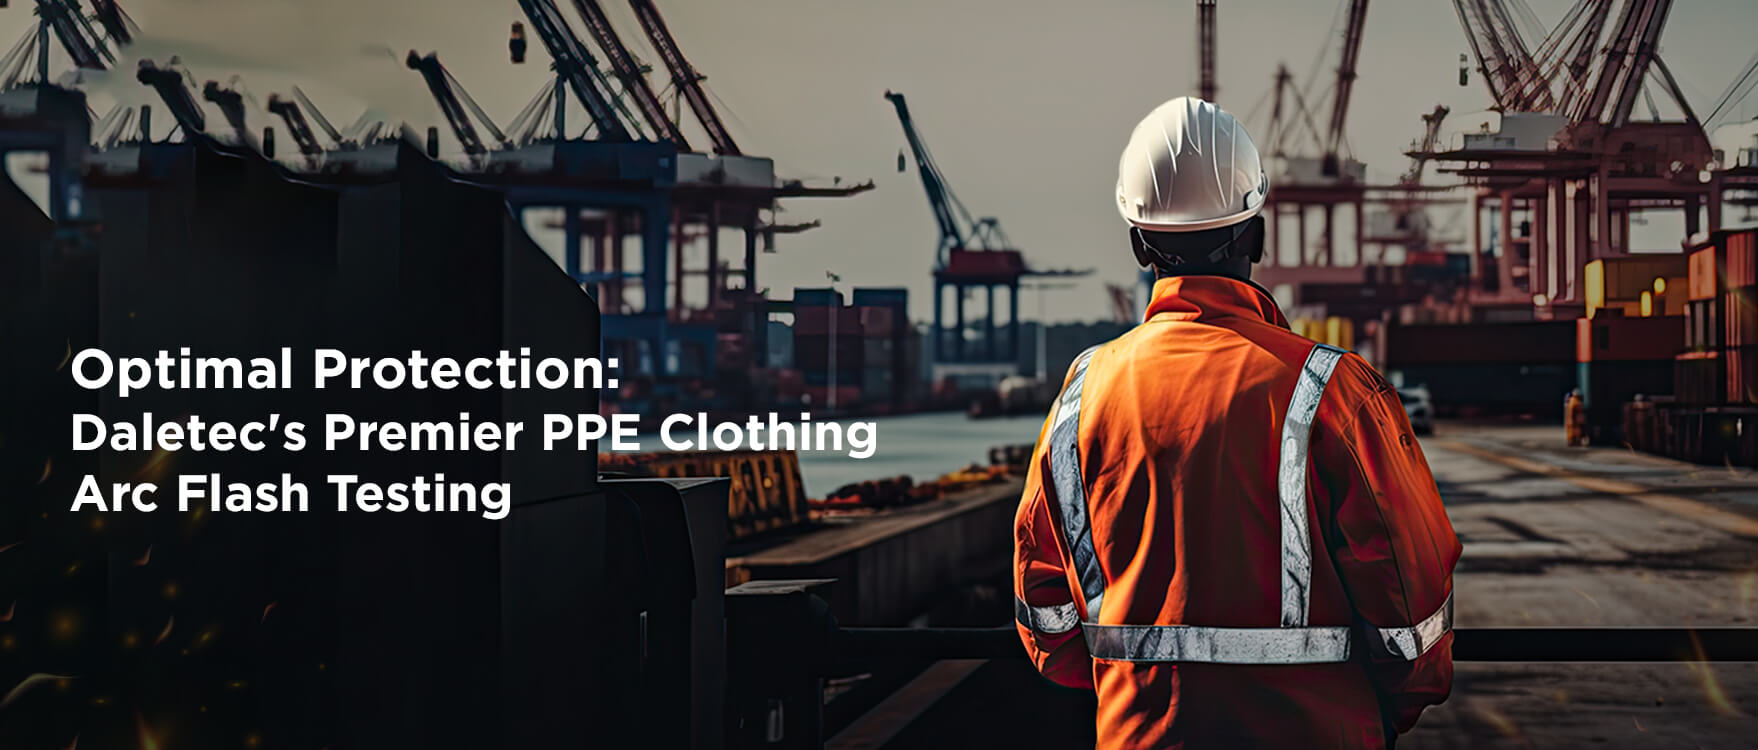 Best PPE(Personal Protective Equipment) Clothing